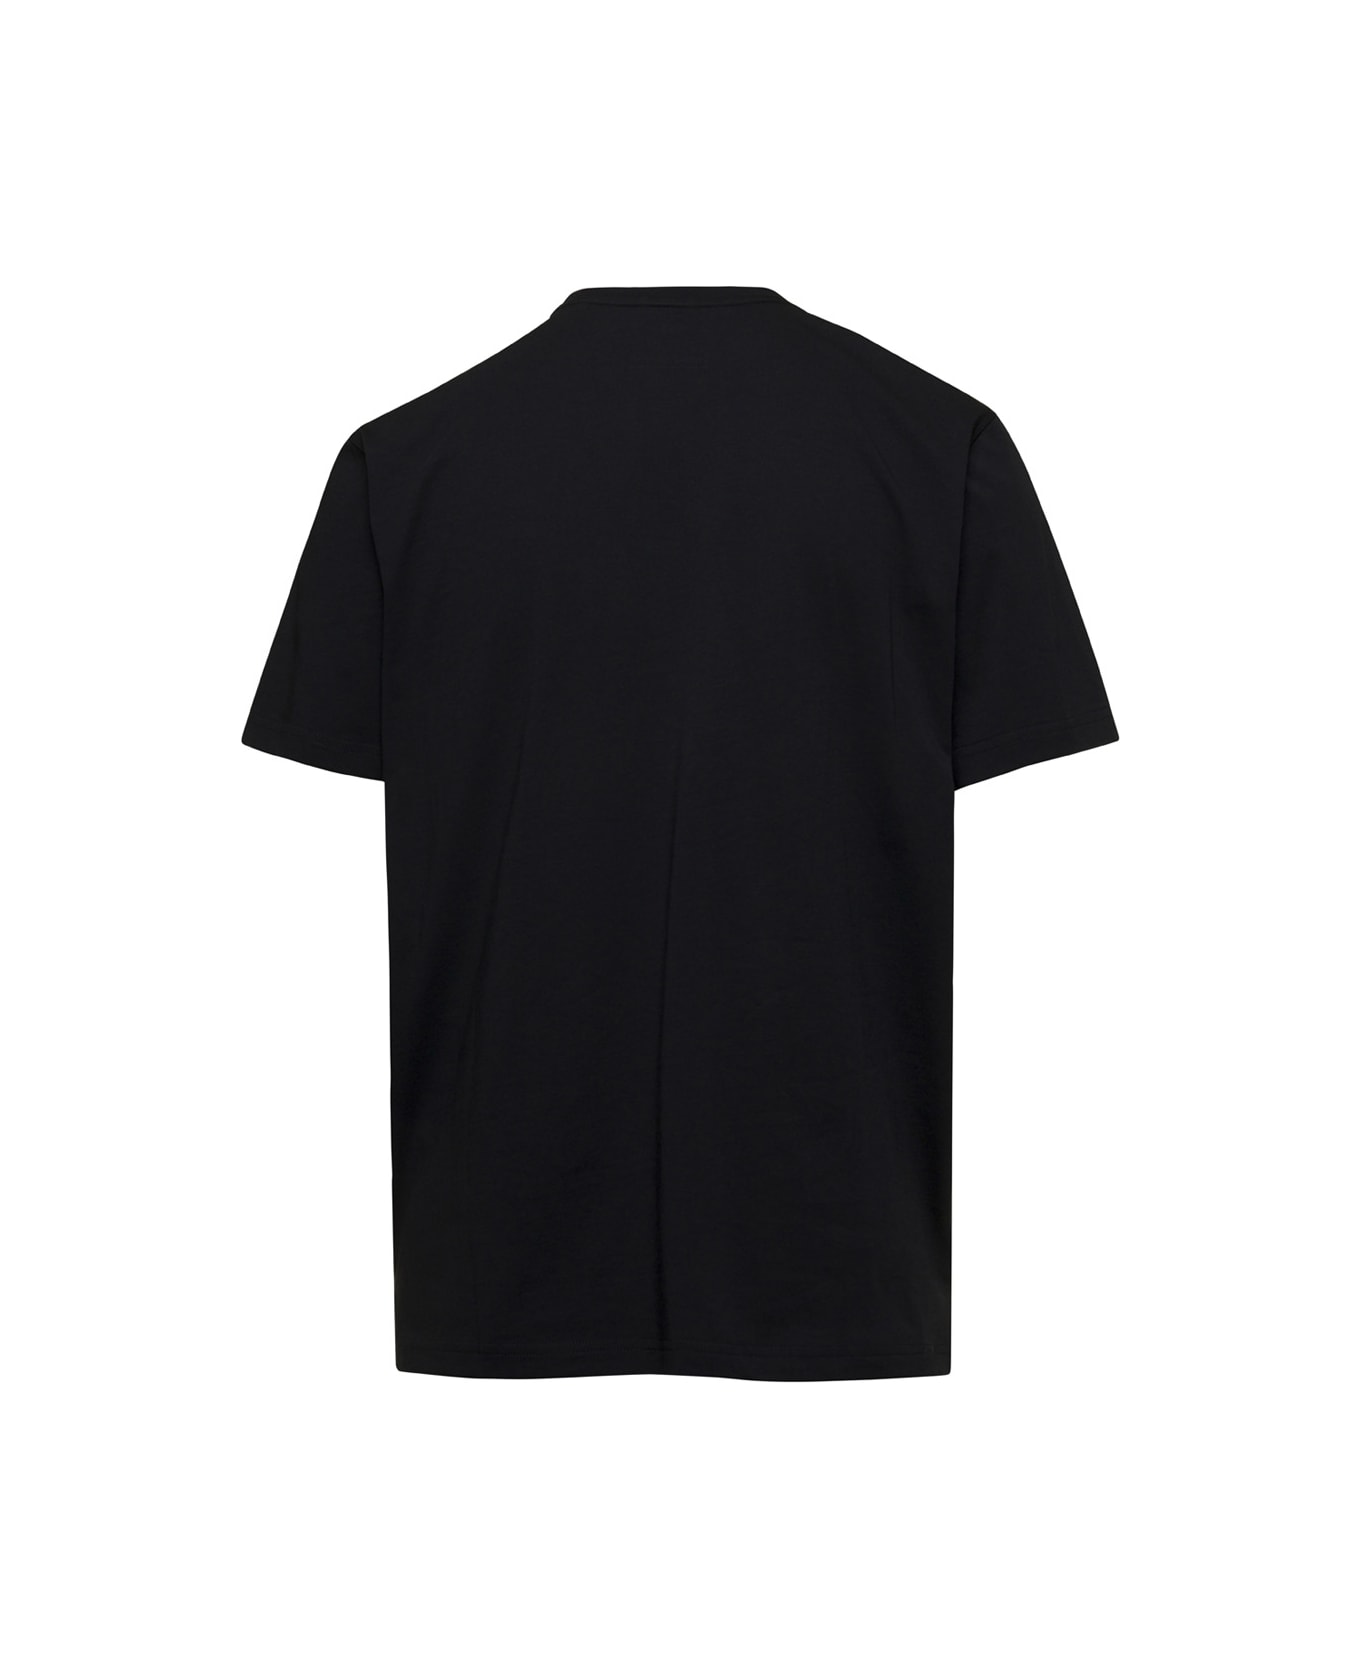 Parajumpers Black T-shirt With Patch Pocket And Zip In Cotton Man - Black シャツ